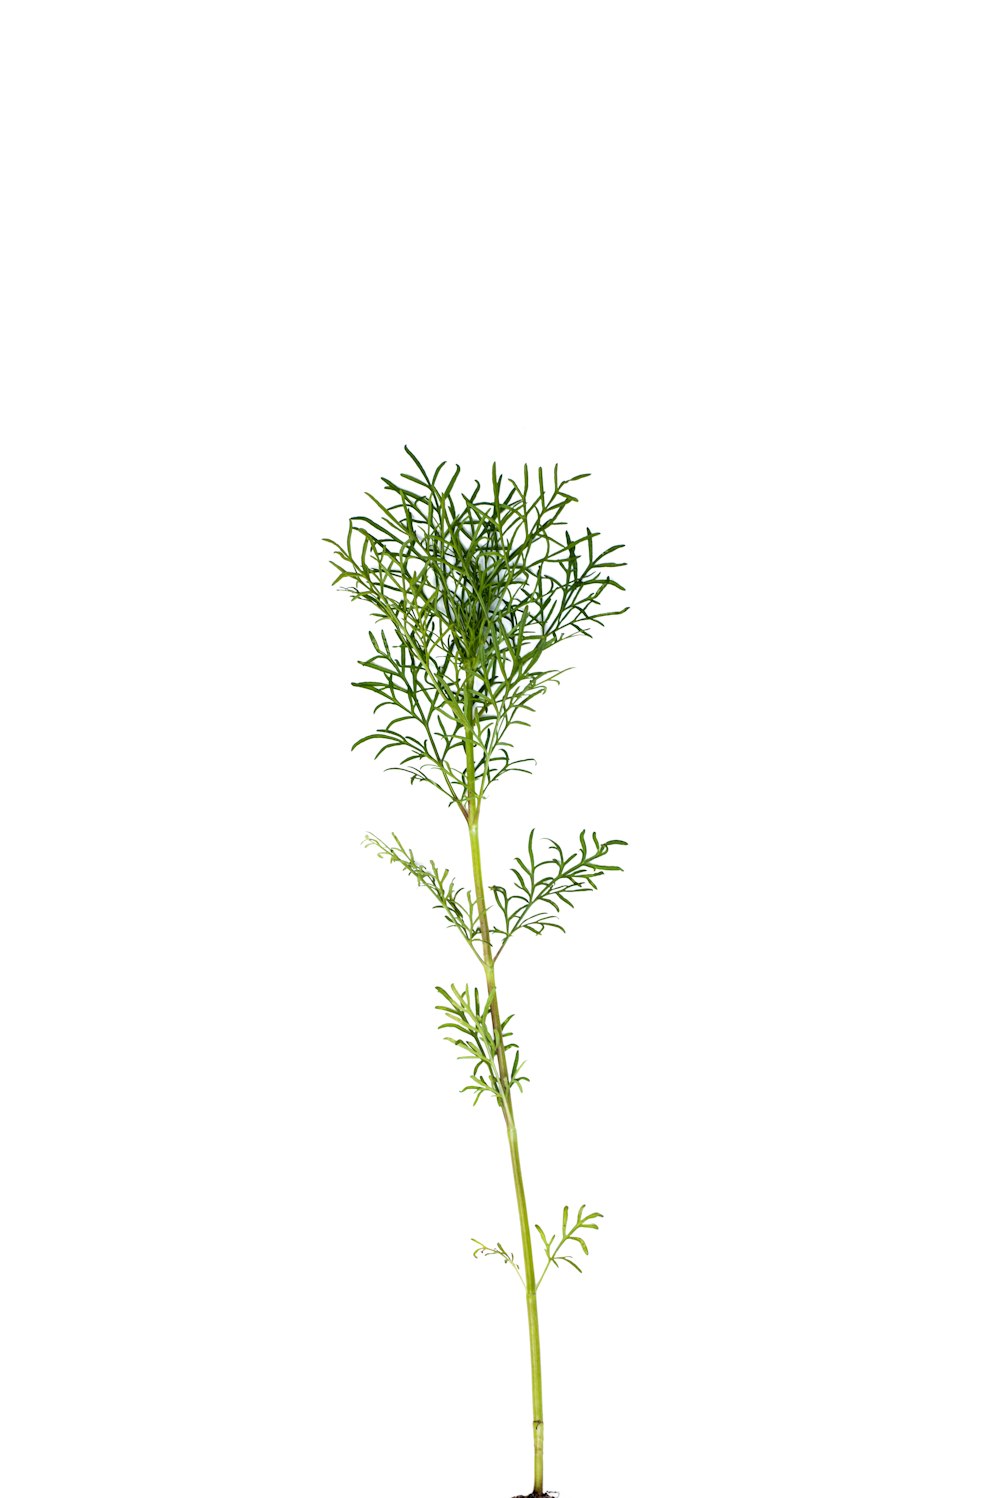 a plant with a long stem is shown on a white background